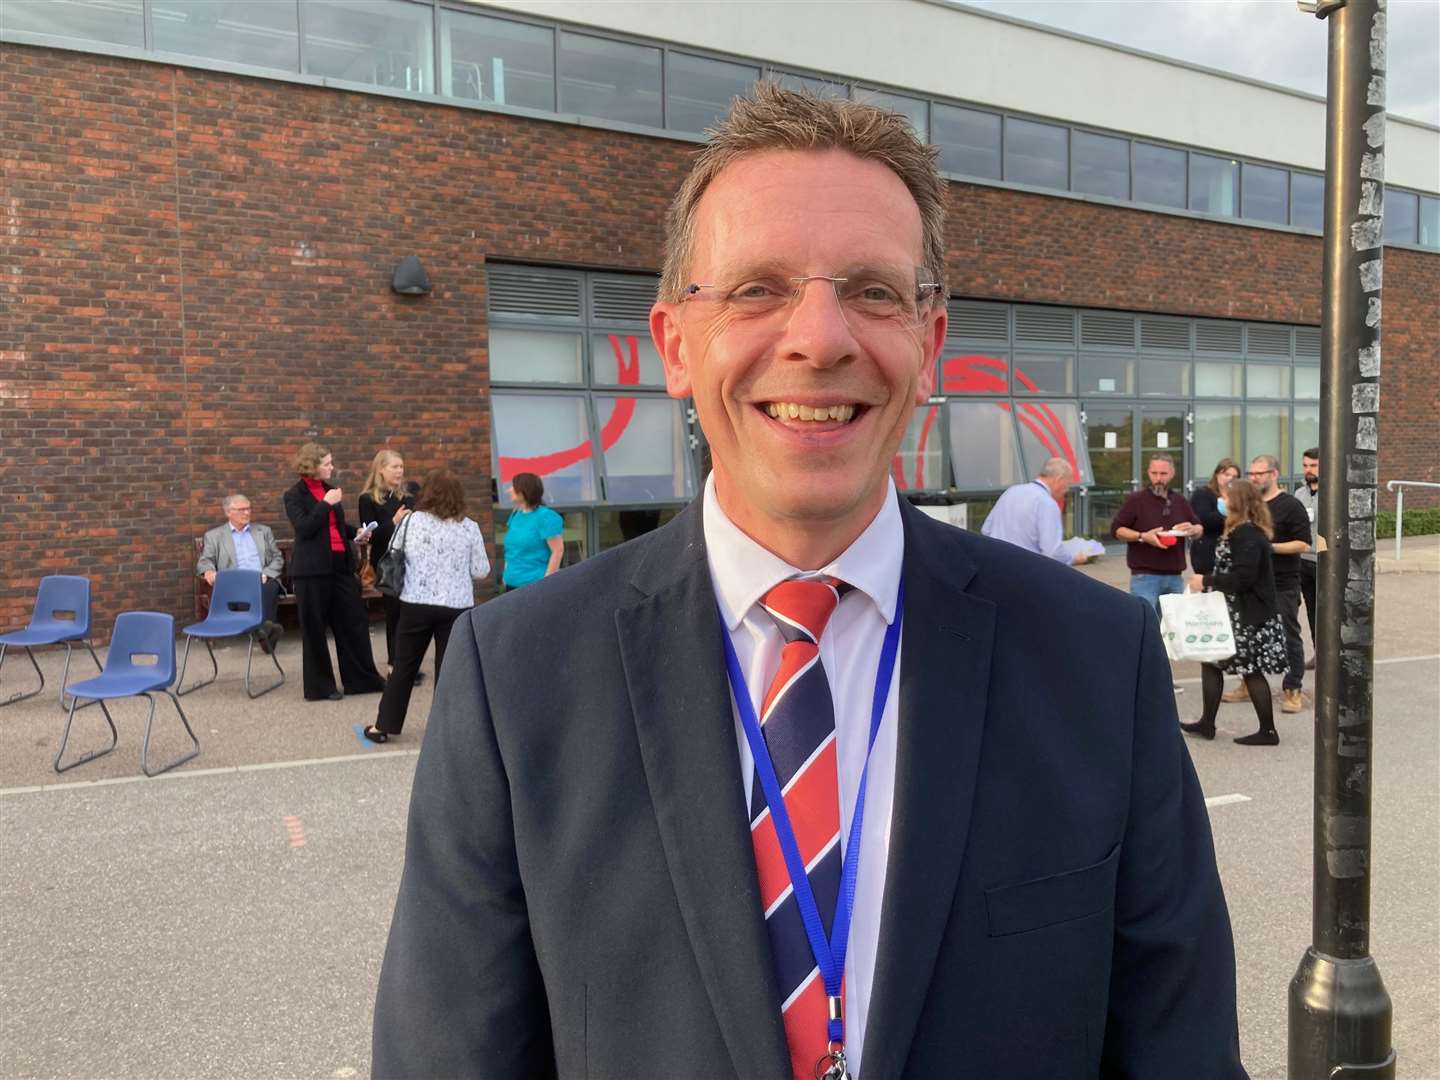 Andy Booth, new principal of Oasis Academy Isle of Sheppey